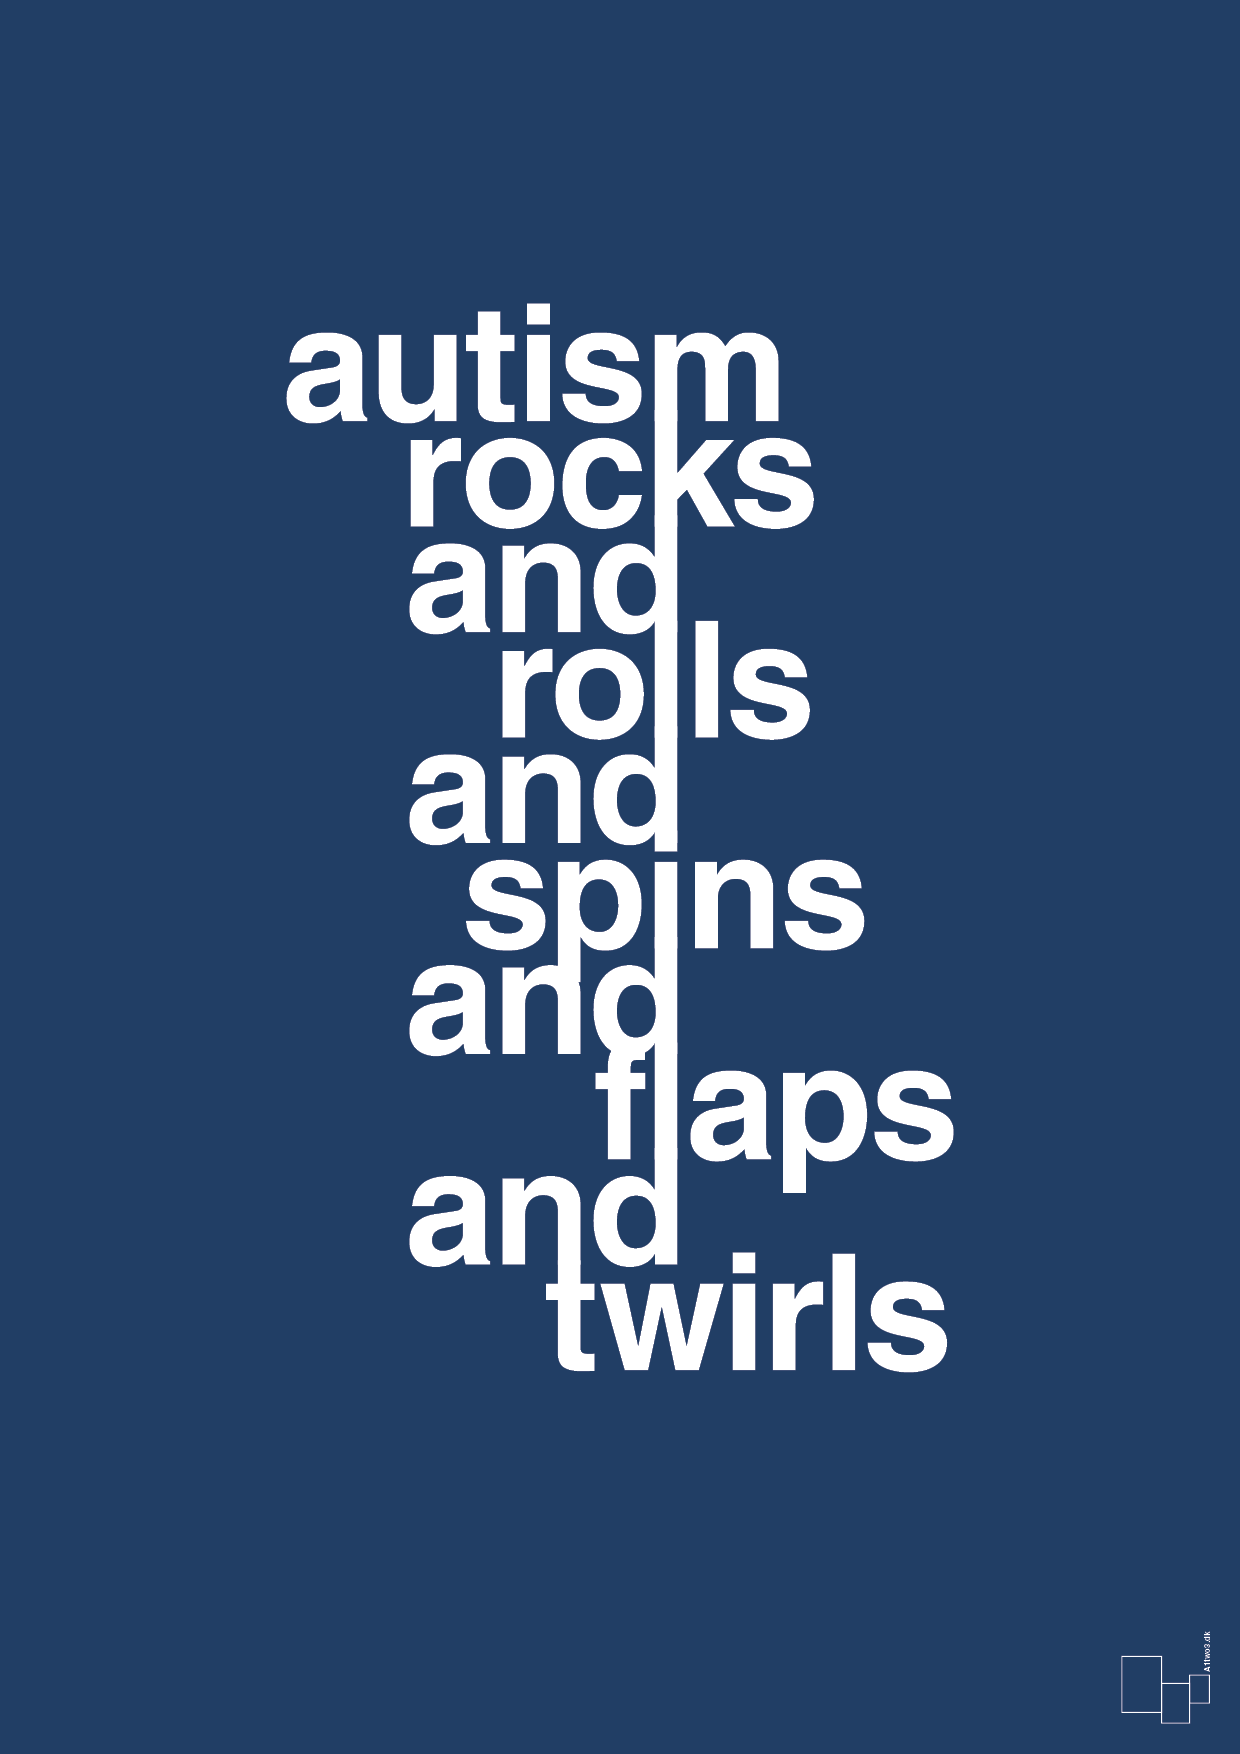 autism rocks and rolls and spins and flaps and twirls - Plakat med Samfund i Lapis Blue